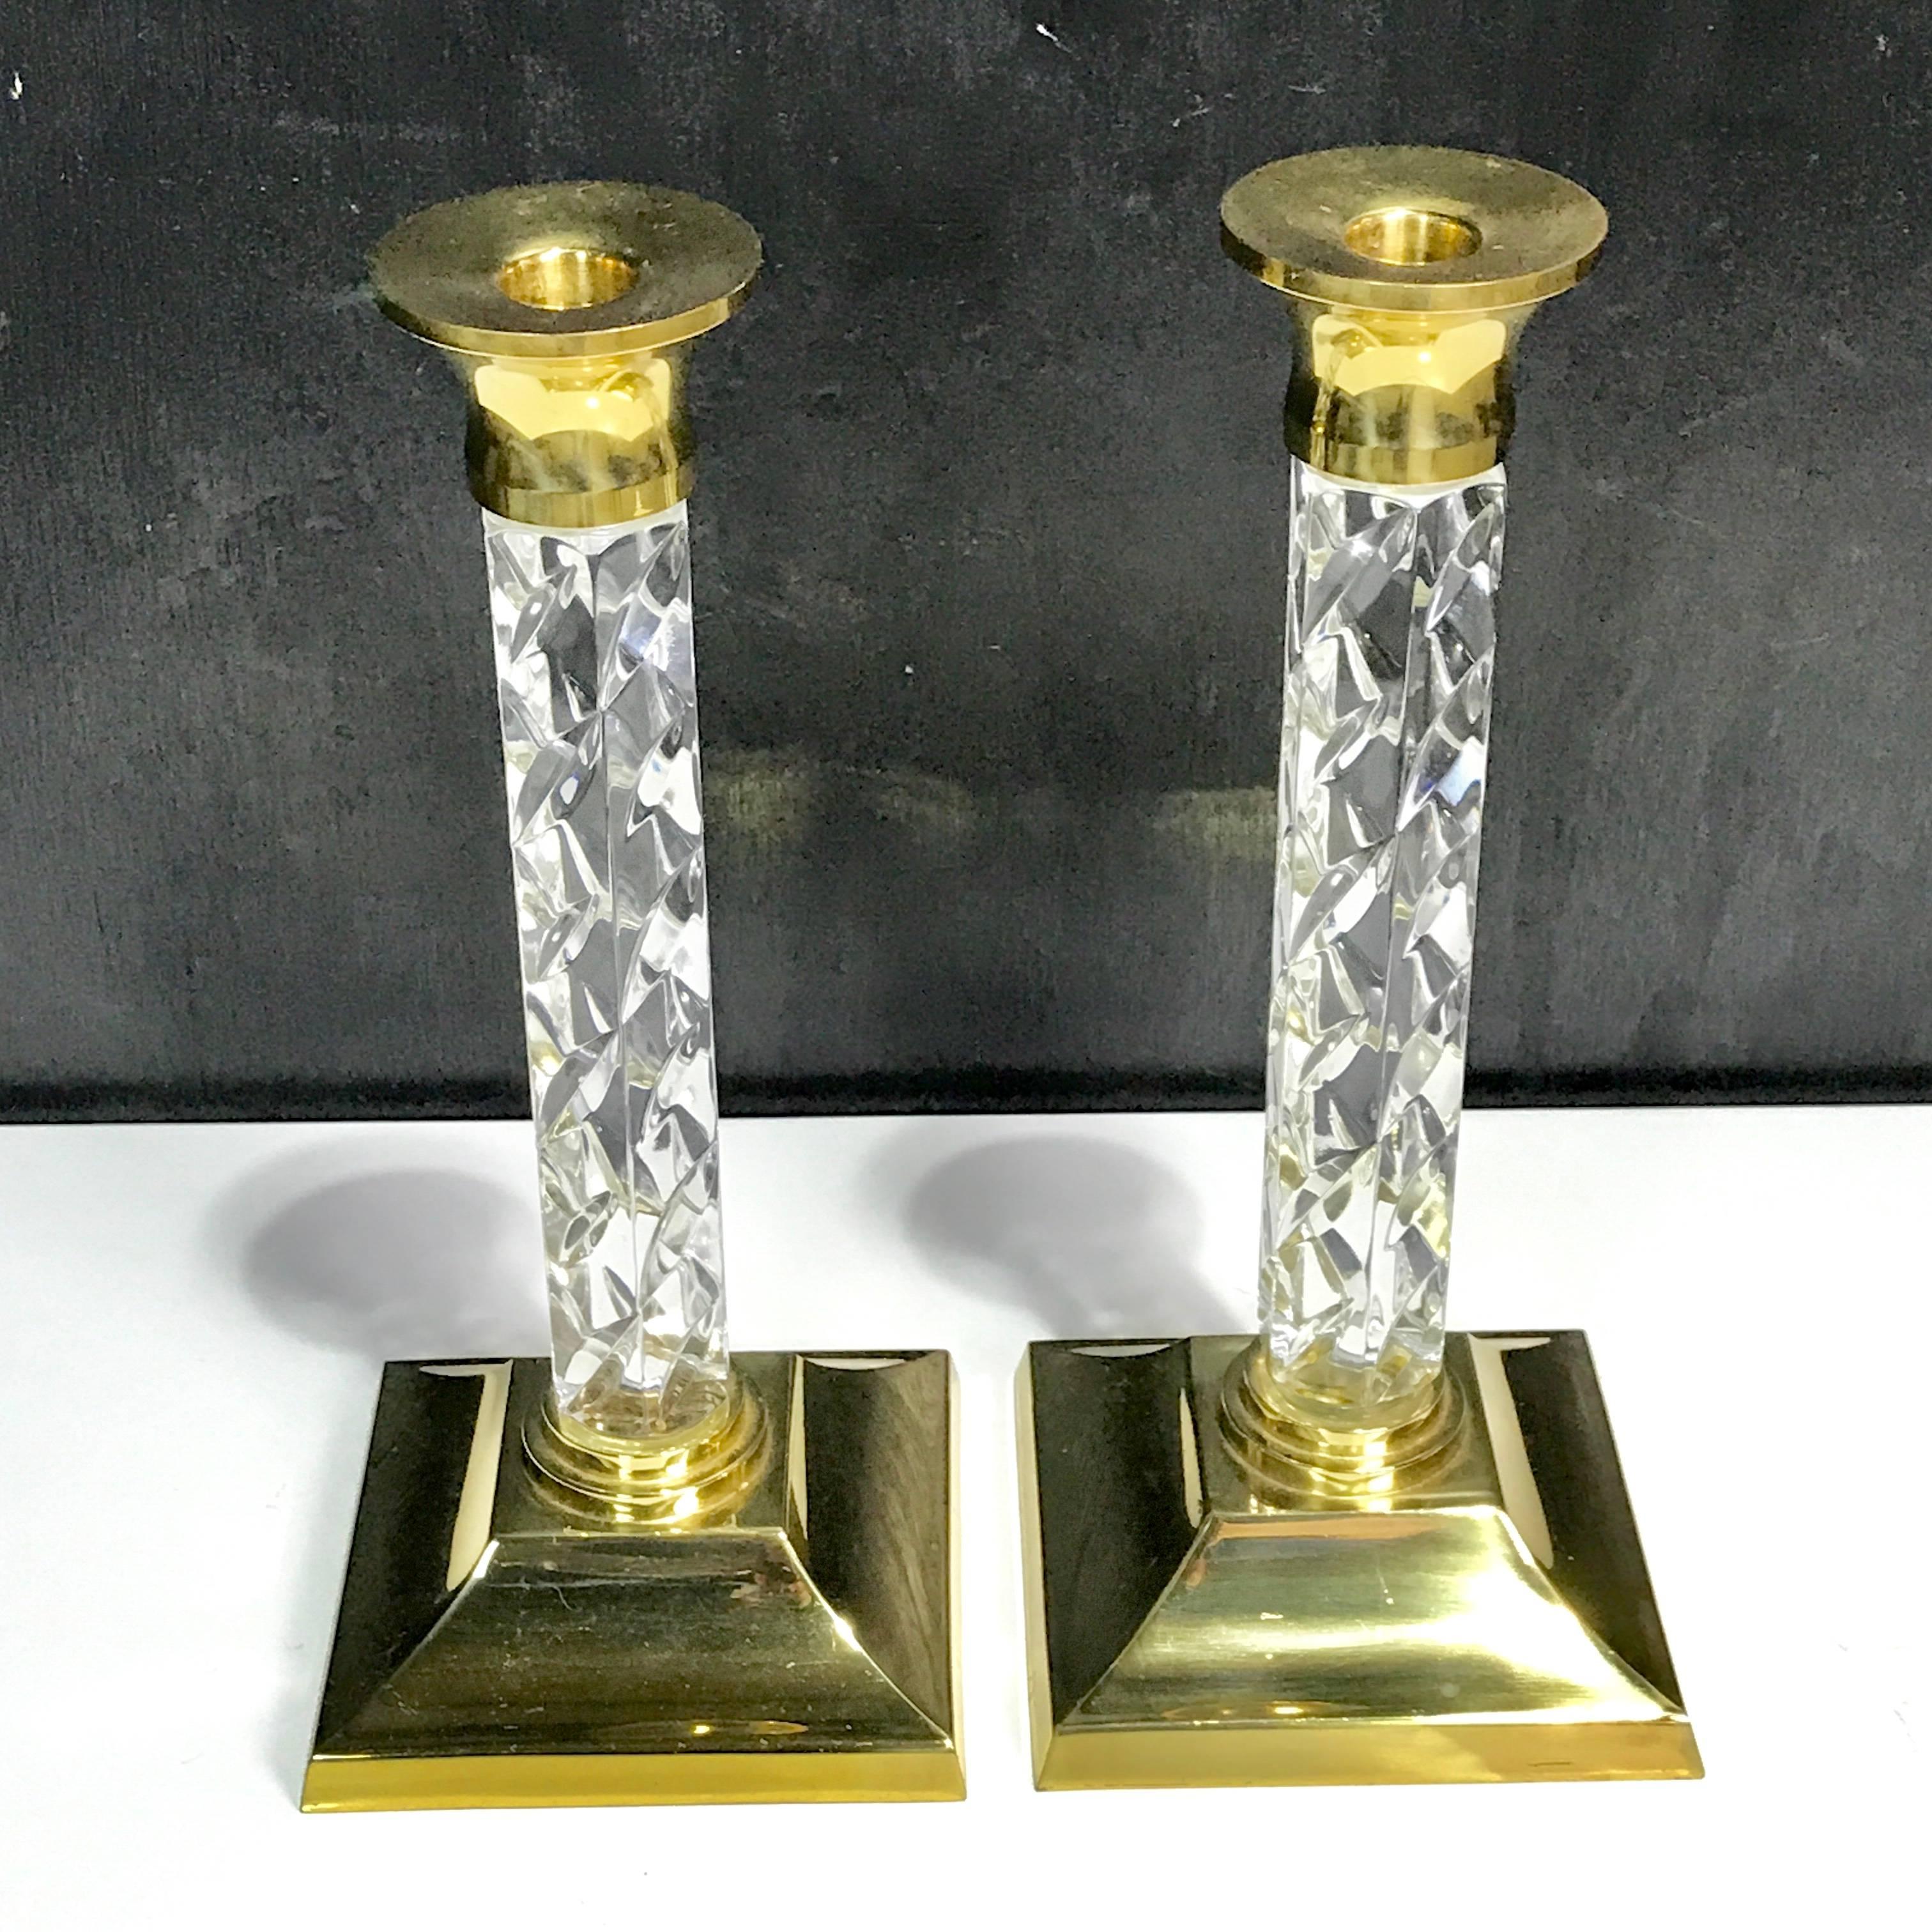 Pair of midcentury waterford crystal and brass candlesticks.